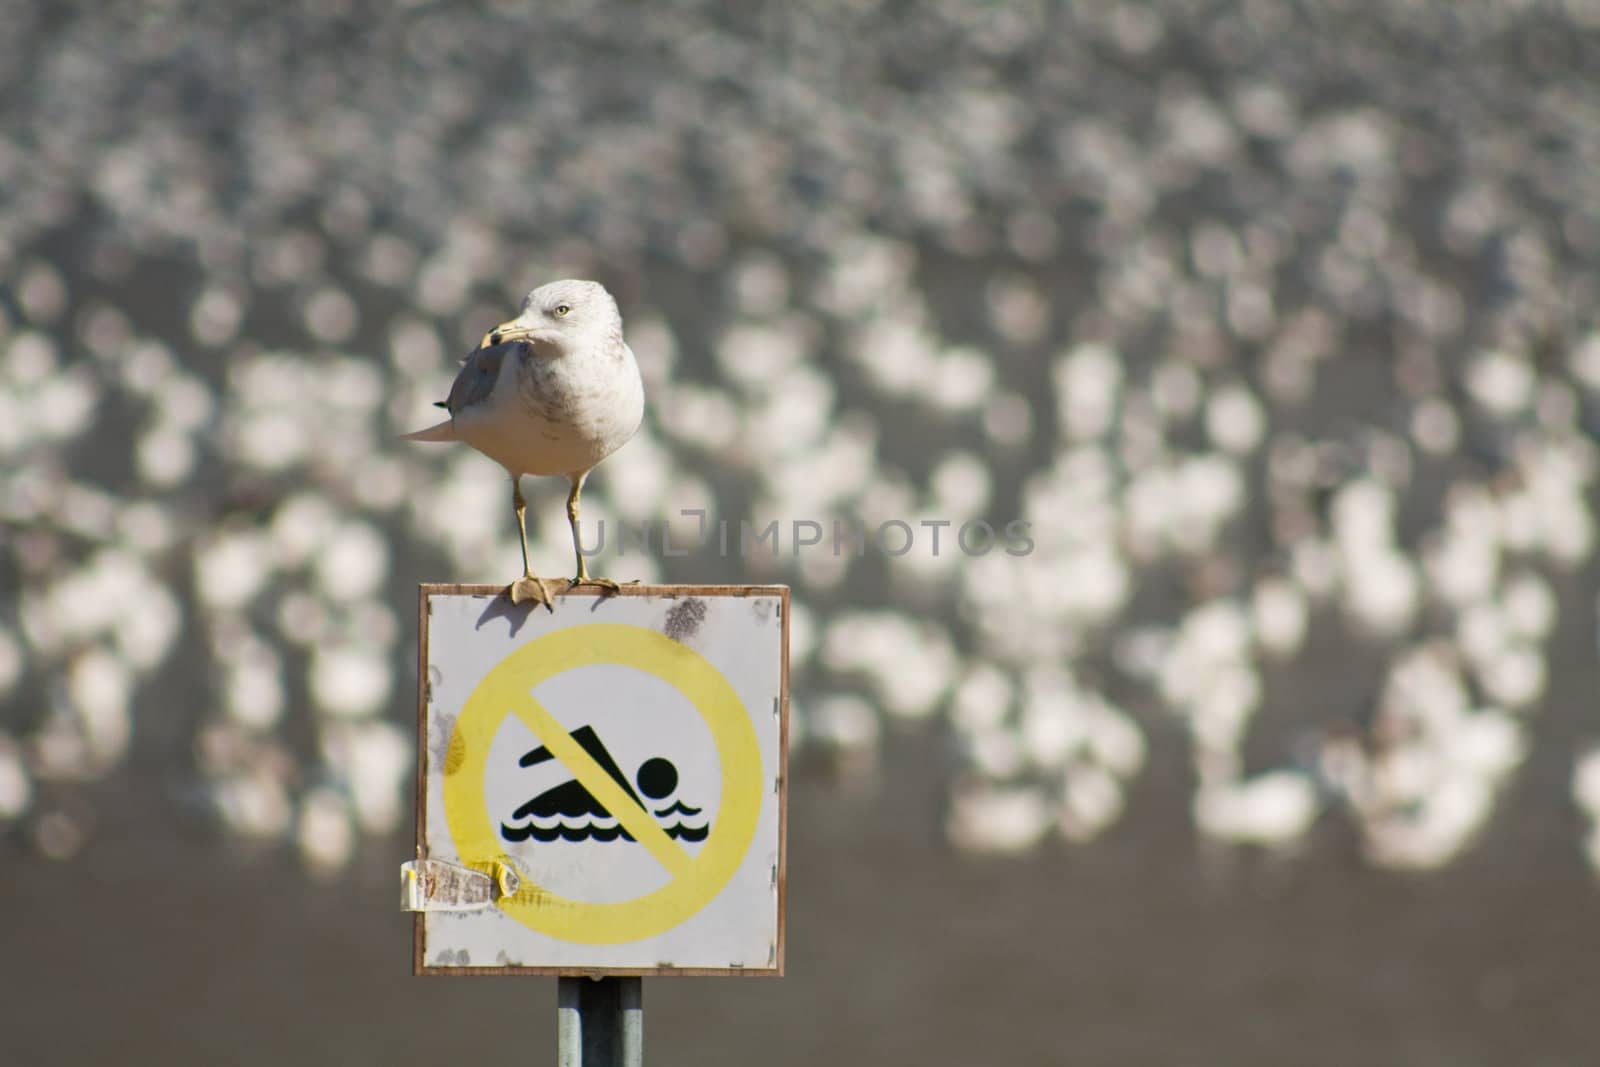 Seagull in front of snow geese by Talanis